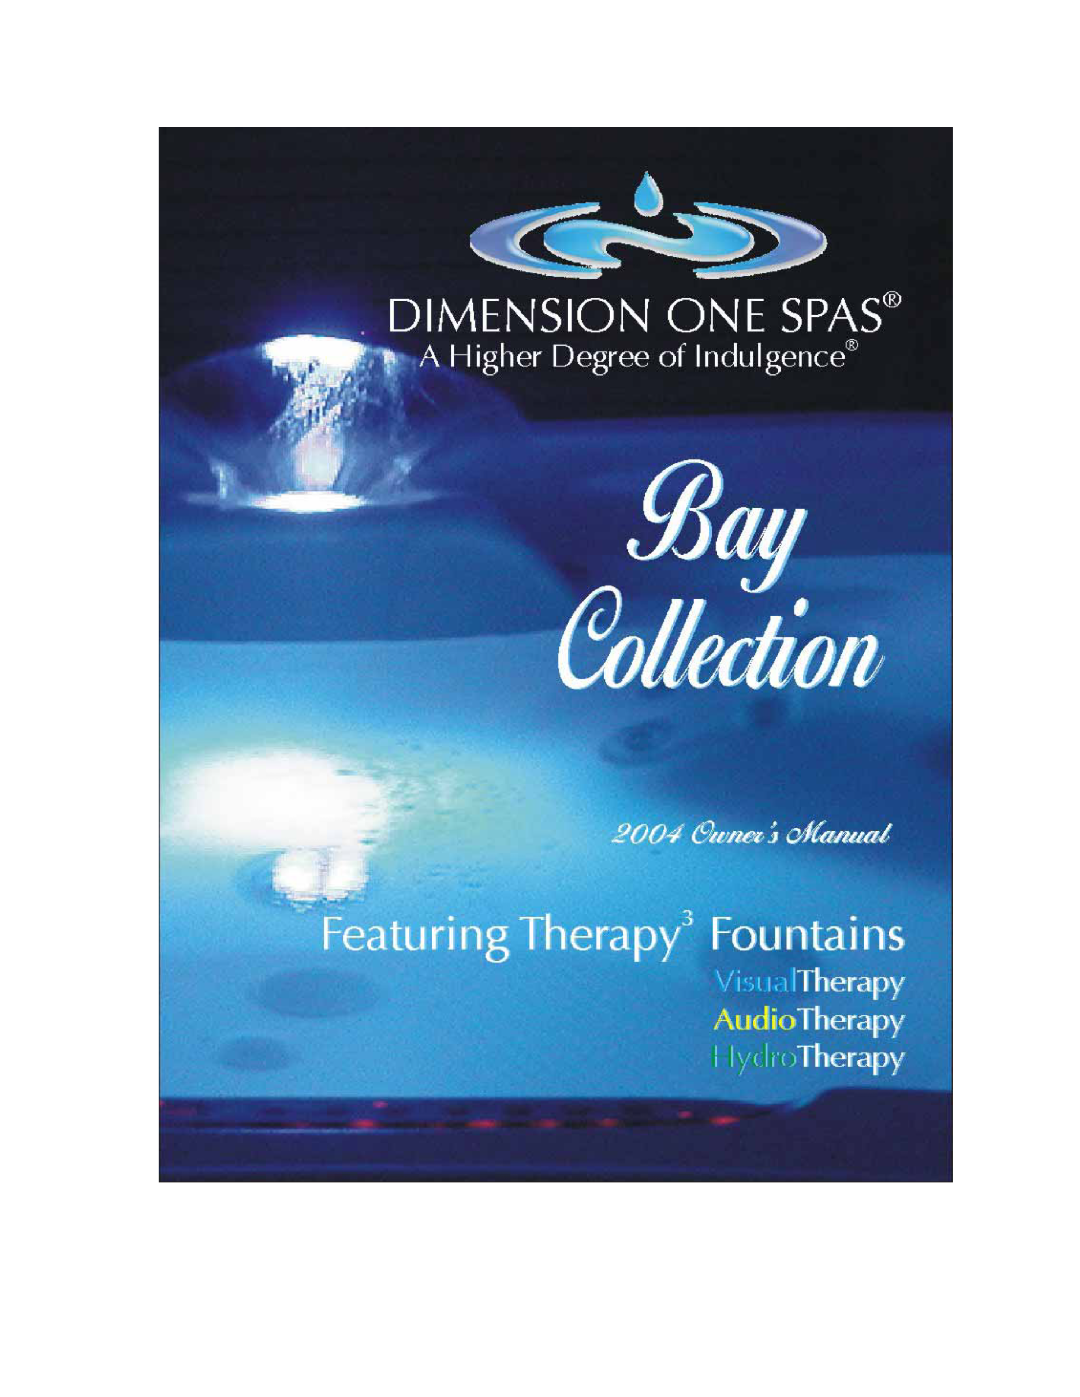 Dimension One Spas Bay Collection manual 